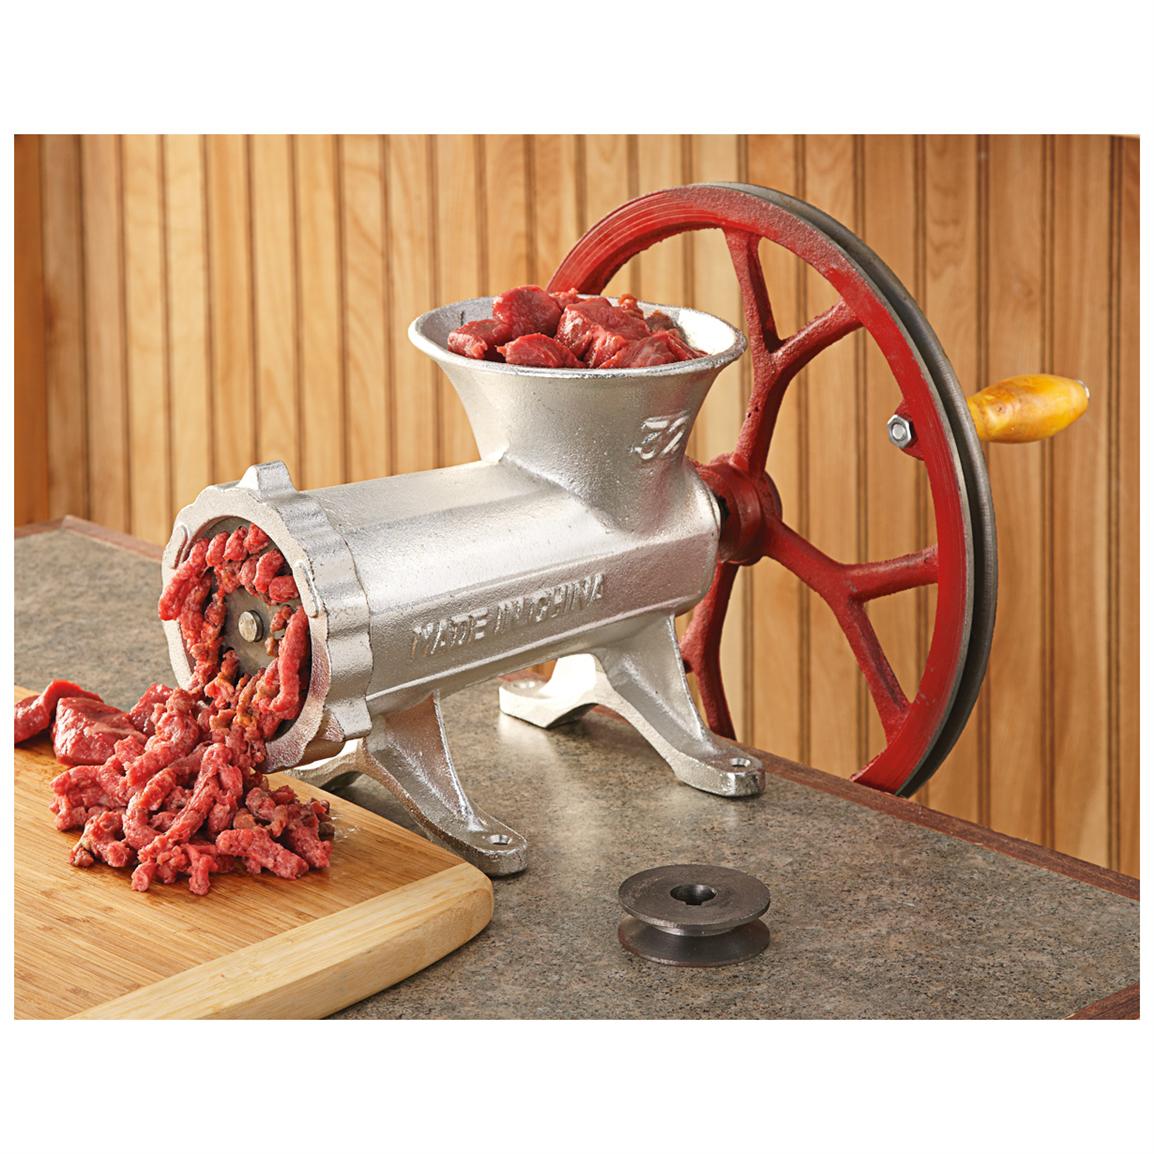 Stainless Steel Meat Grinder with Pulley - 584148, Game & Meat Grinders